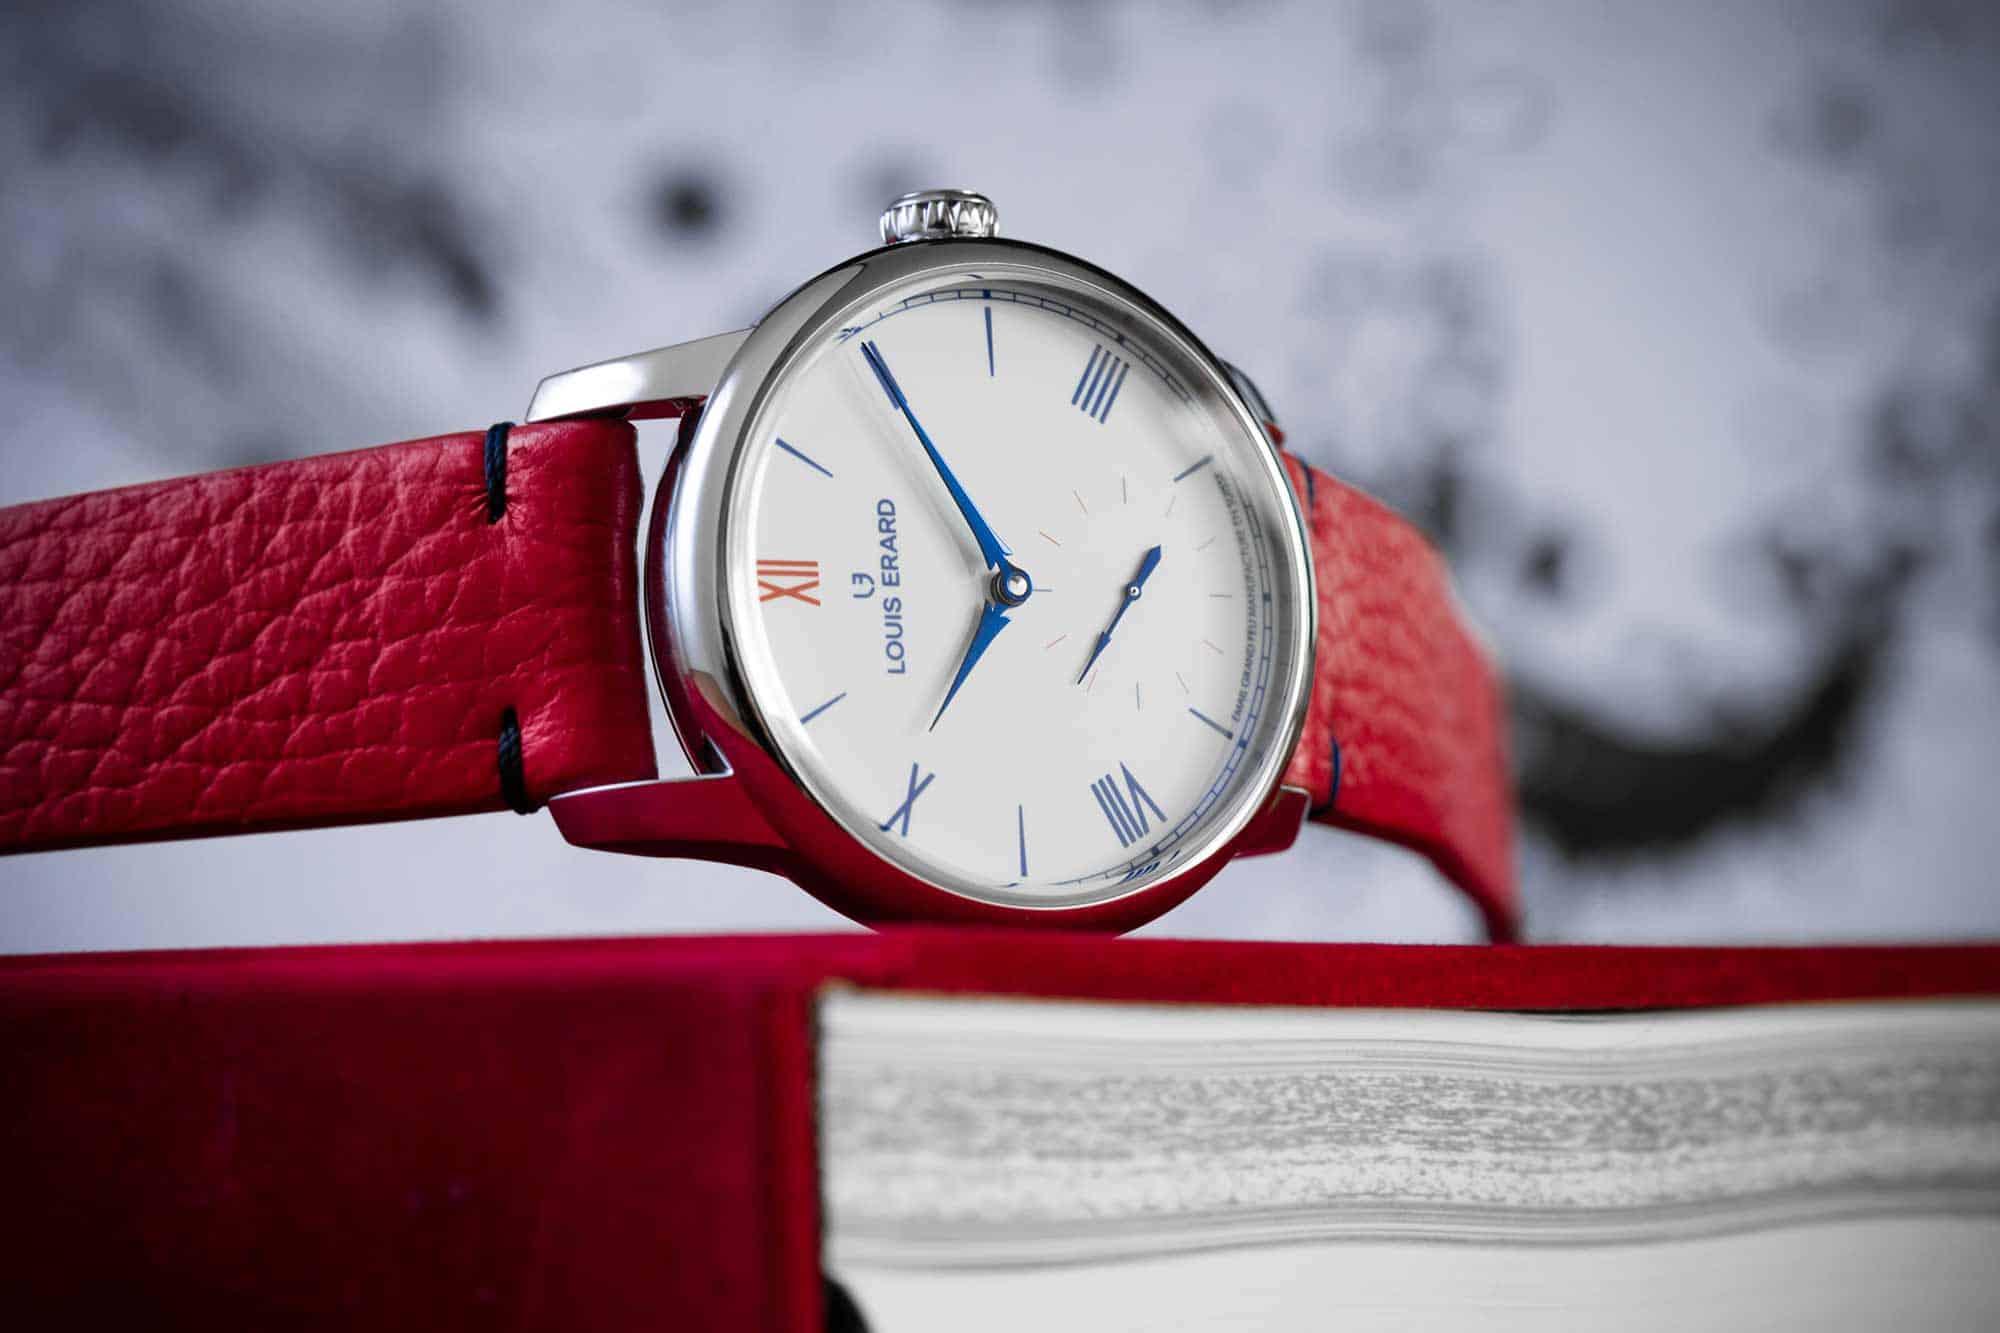 Louis Erard Introduces its First Watch With Enamel Dial